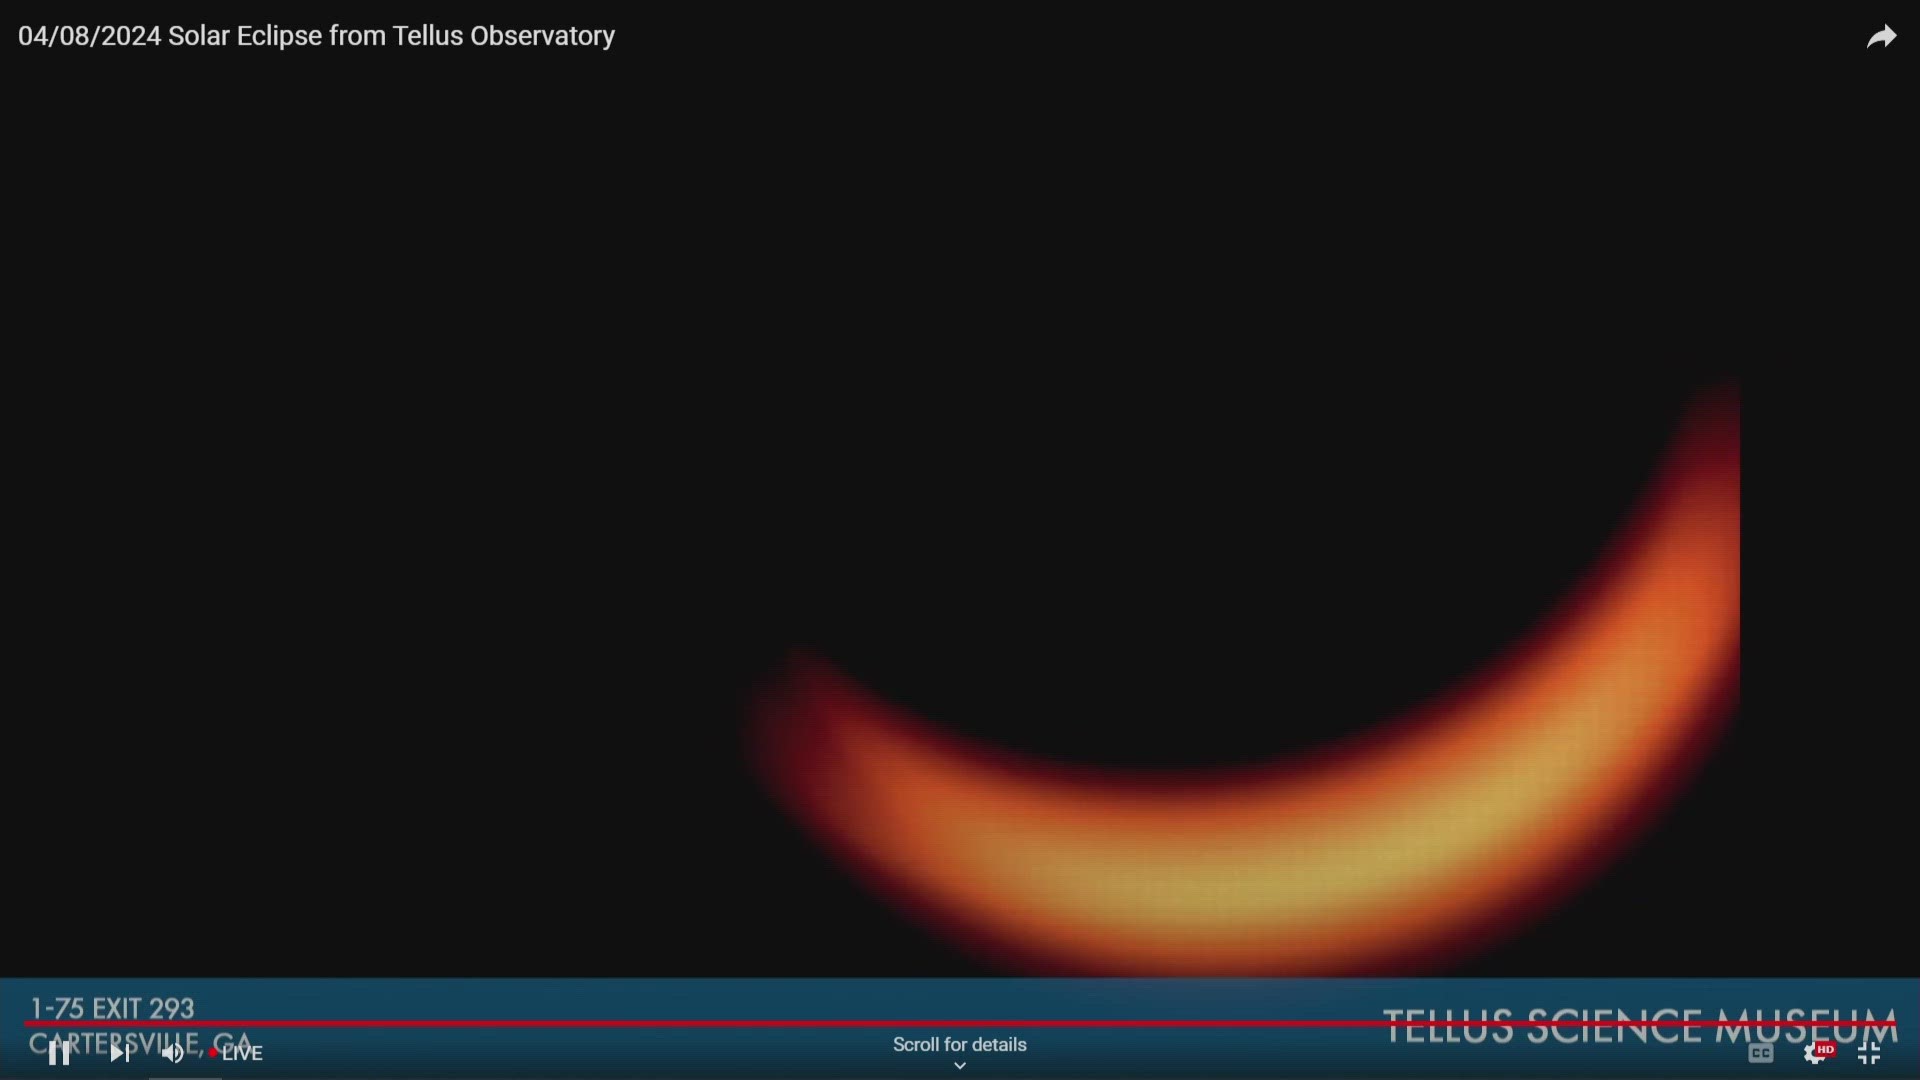 Here's a look through the telescope at the Tellus Science Museum in Georgia as the solar eclipse reaches its peak.